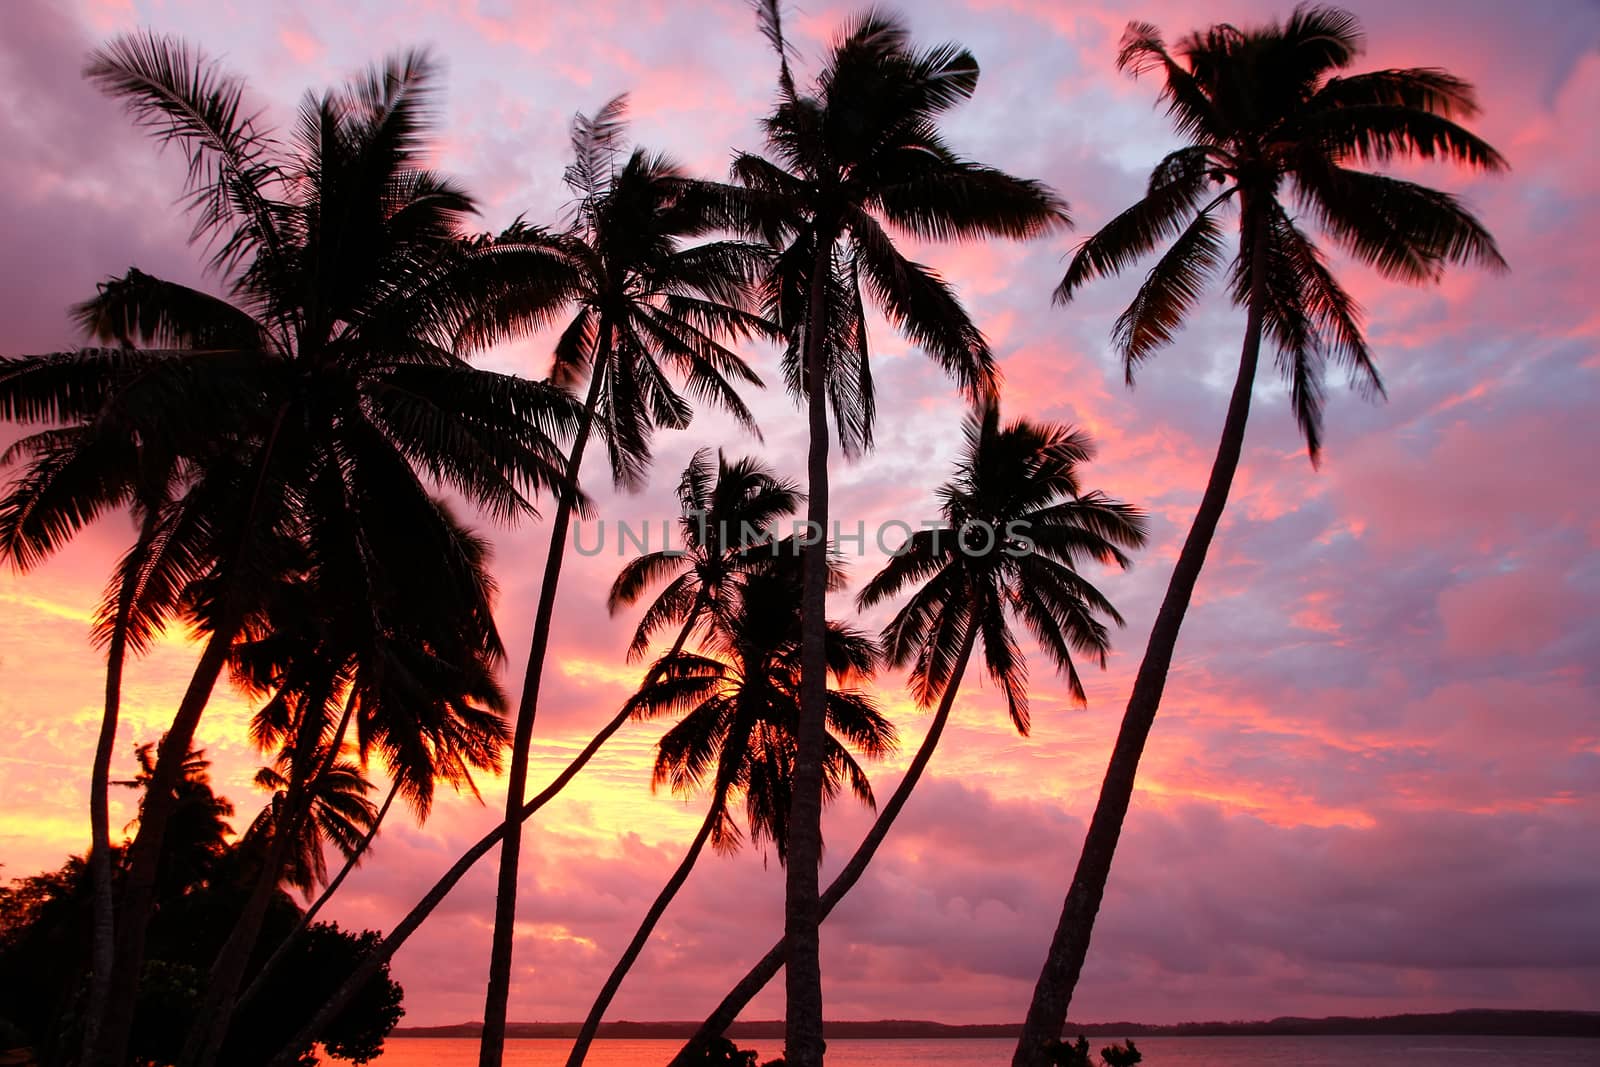 Silhouetted palm trees on a beach at sunset, Ofu island, Tonga by donya_nedomam